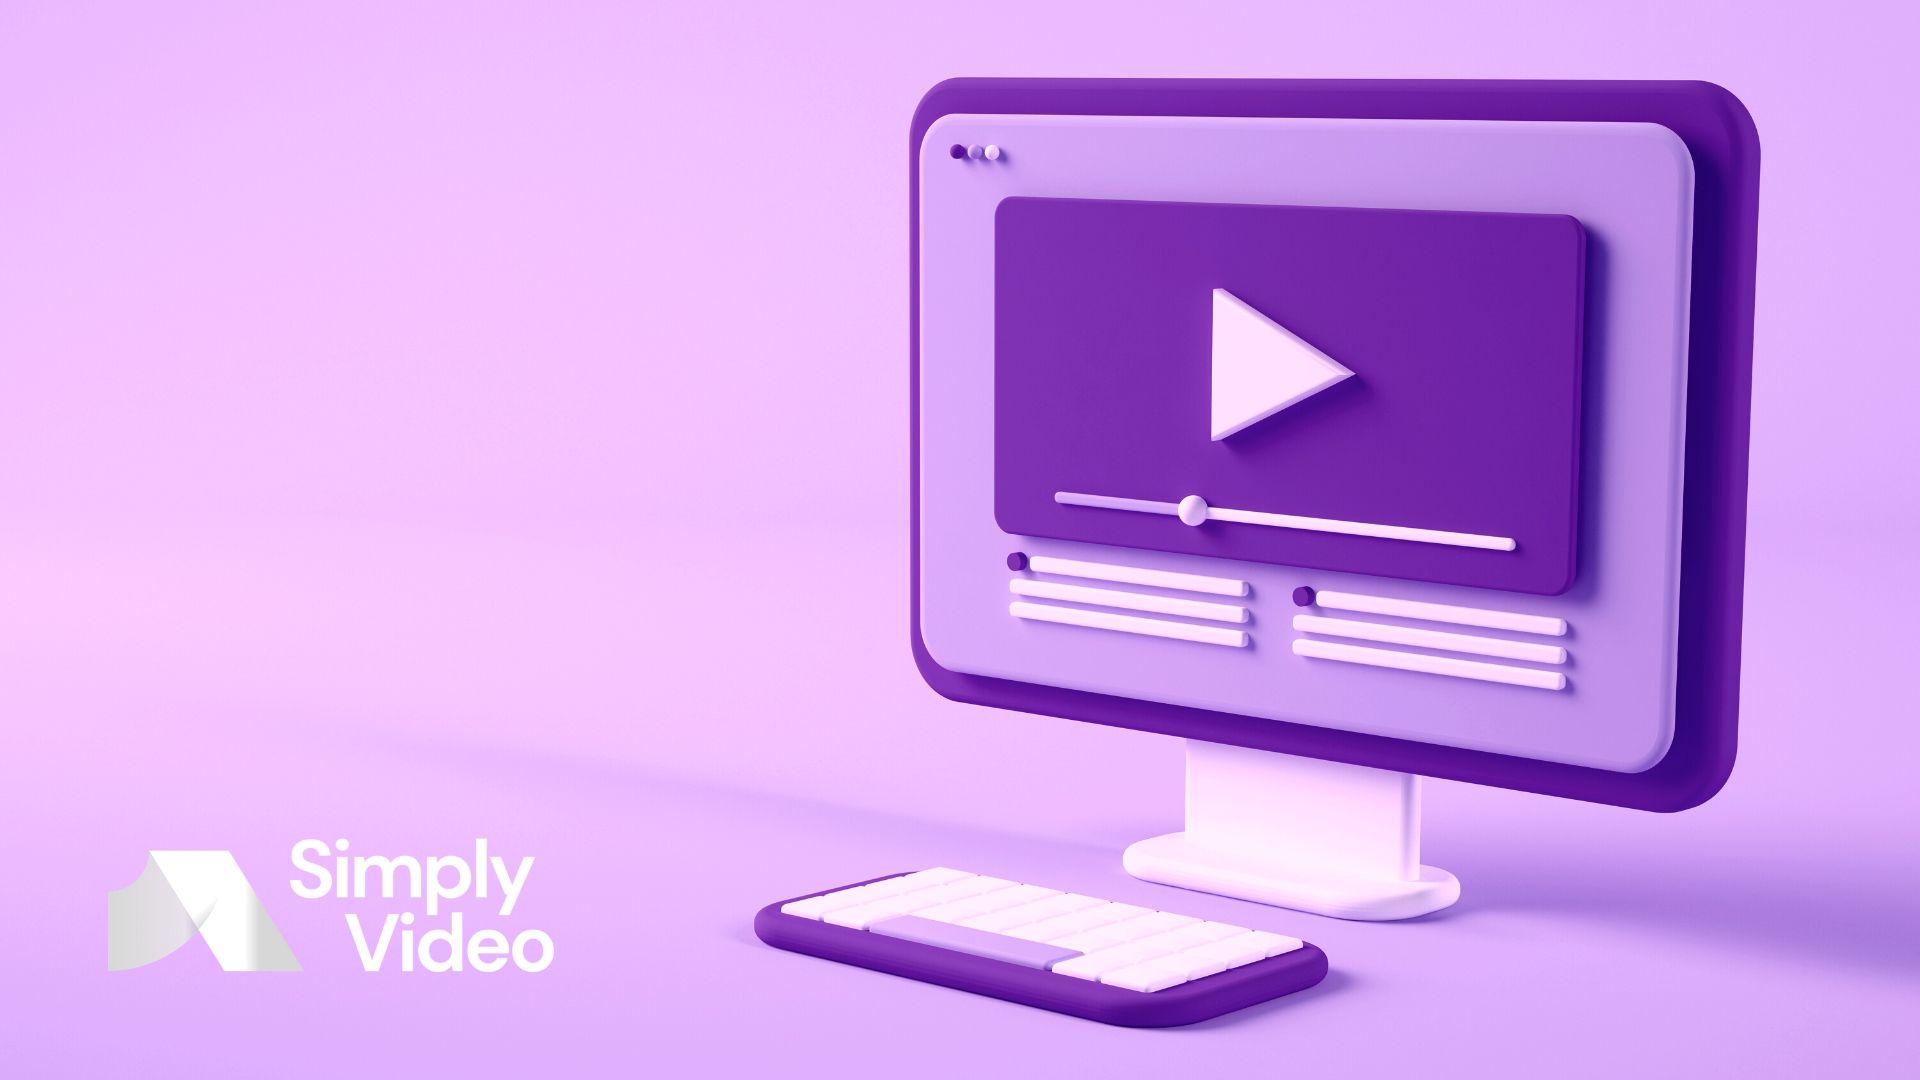 The business world is slow to enter the Twitch sphere – but why? Learn what draws people to Twitch and how your business can utilize it.